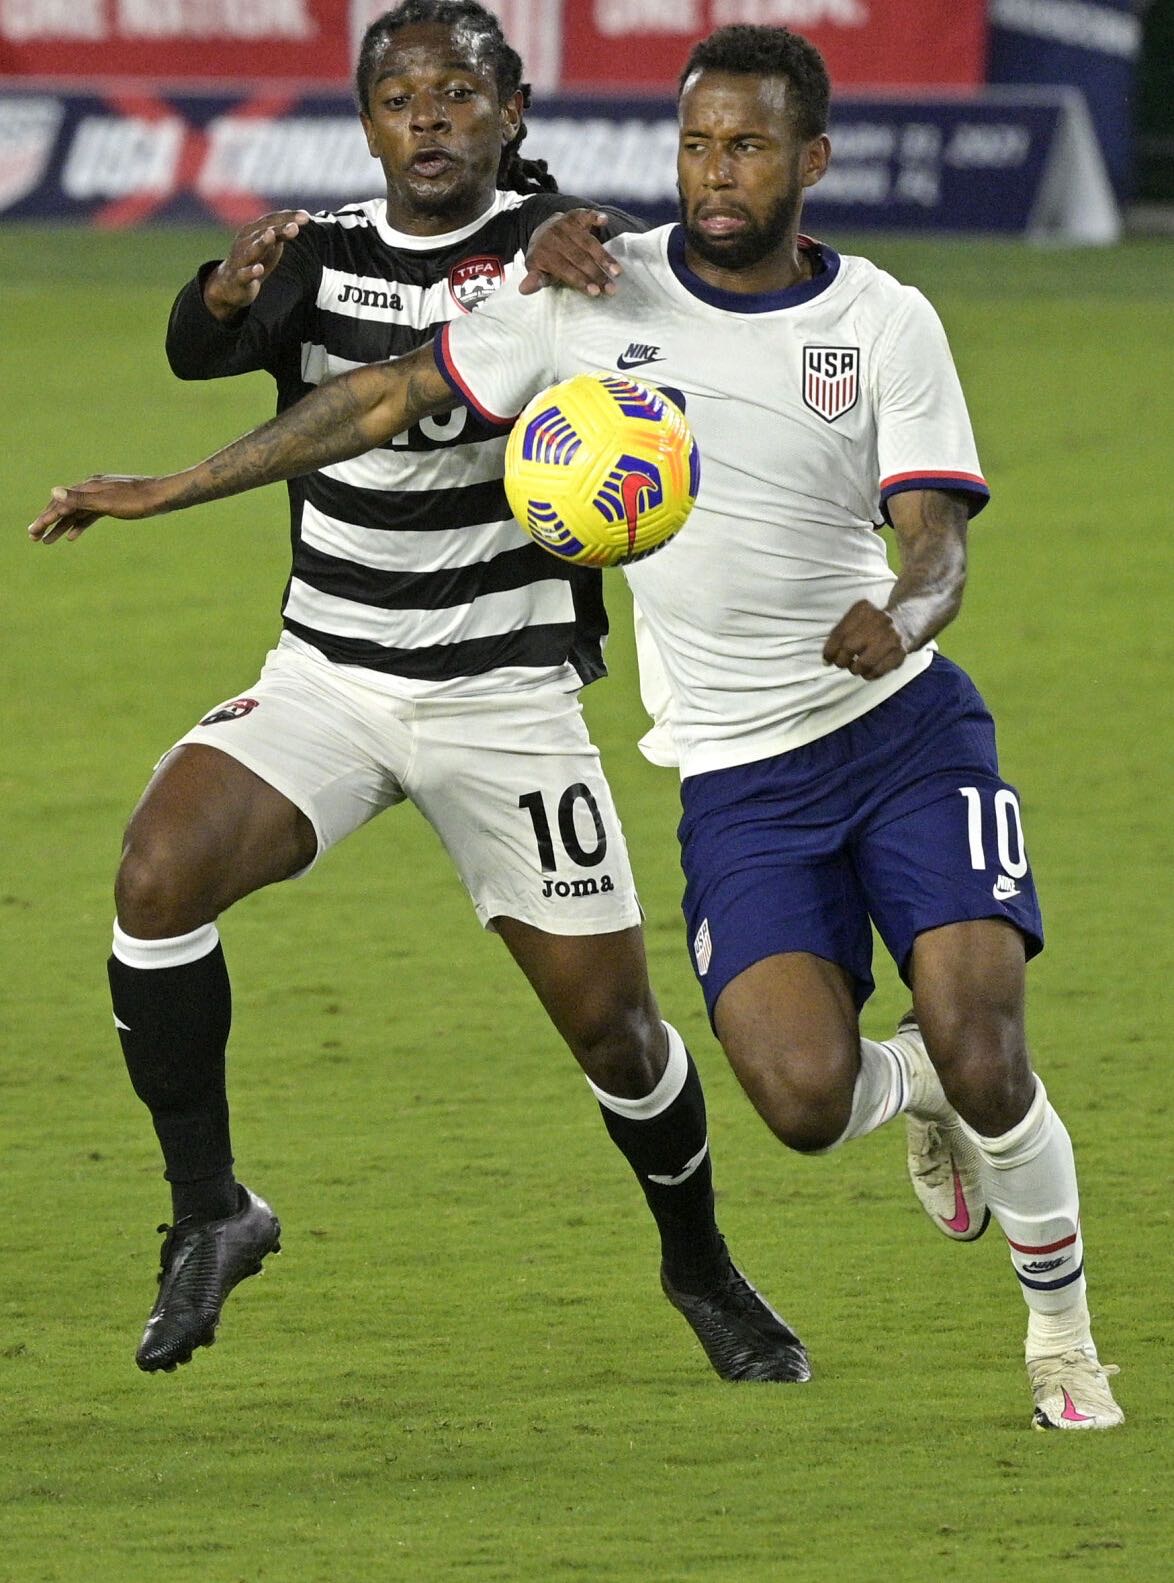 Photo: Trinidad and Tobago midfielder Duane Muckette (left) competes with USA midfielder Kellyn Acosta for the ball during international friendly action in Orlando on 31 January 2021. ...(Copyright AP Photo/Phelan M Ebenhack)